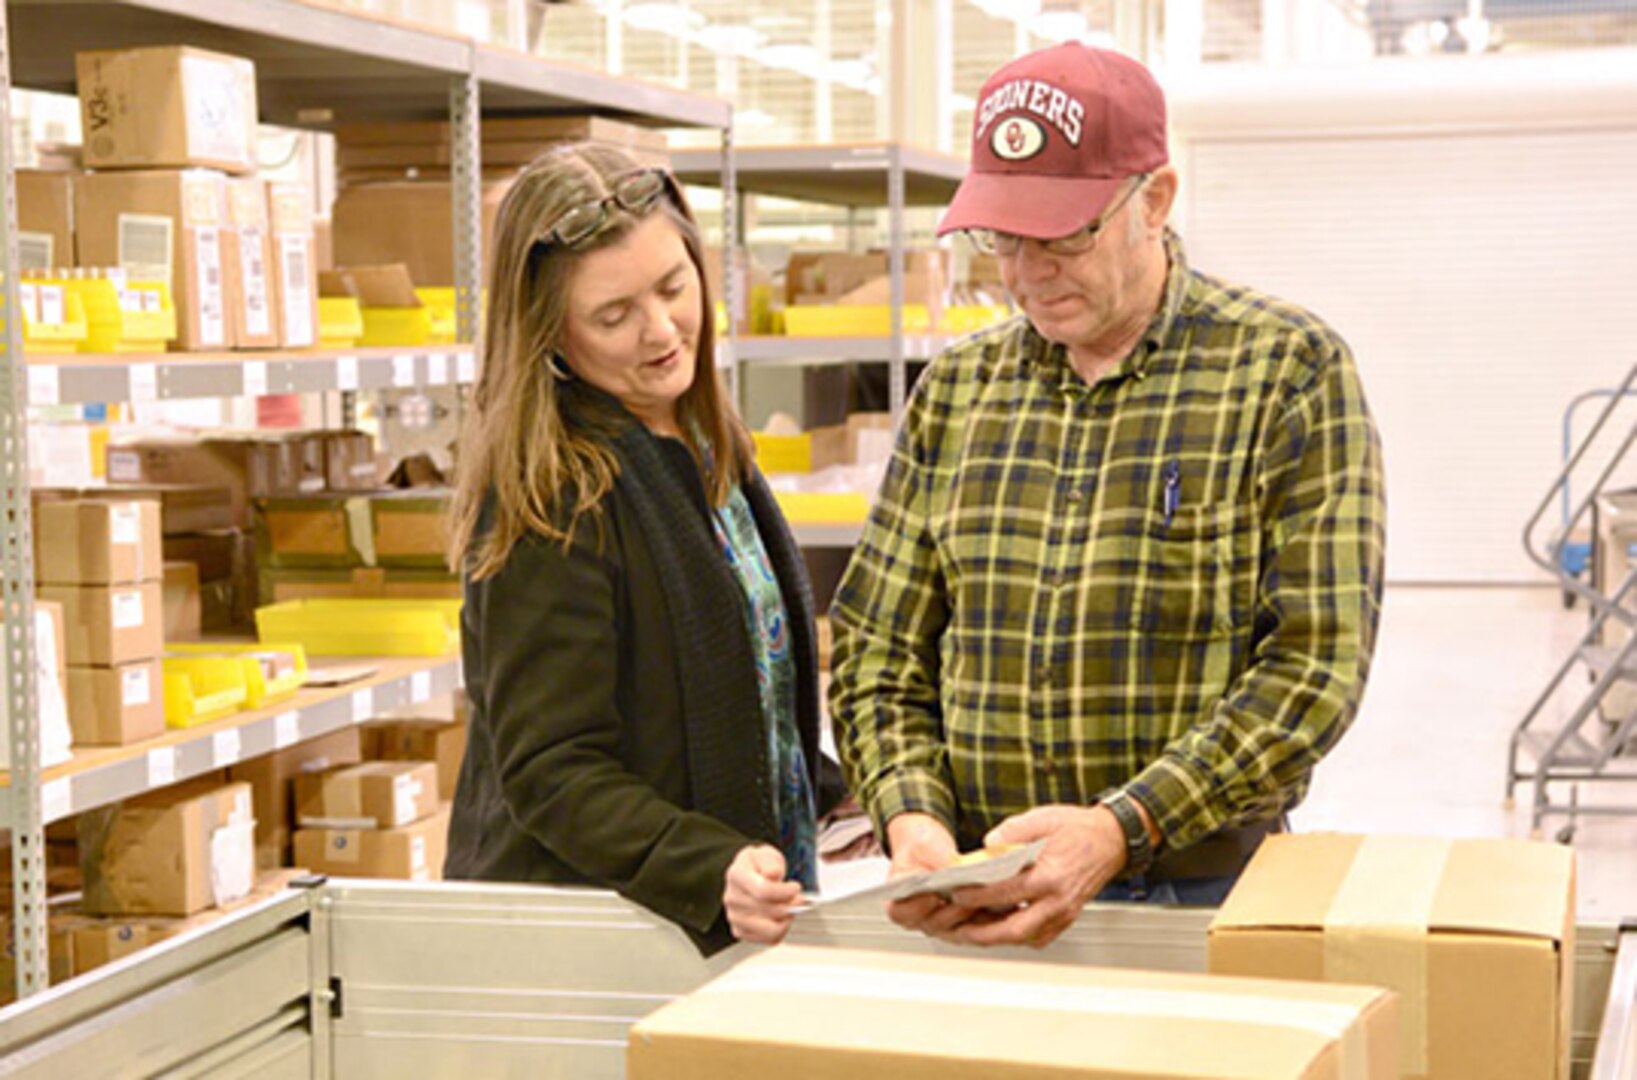 Brenda Price, a Defense Logistics Agency Aviation materials expeditor supervisor, and Kenneth Watkins, another materials expeditor, verify a part before shipping it to a customer Feb. 6.